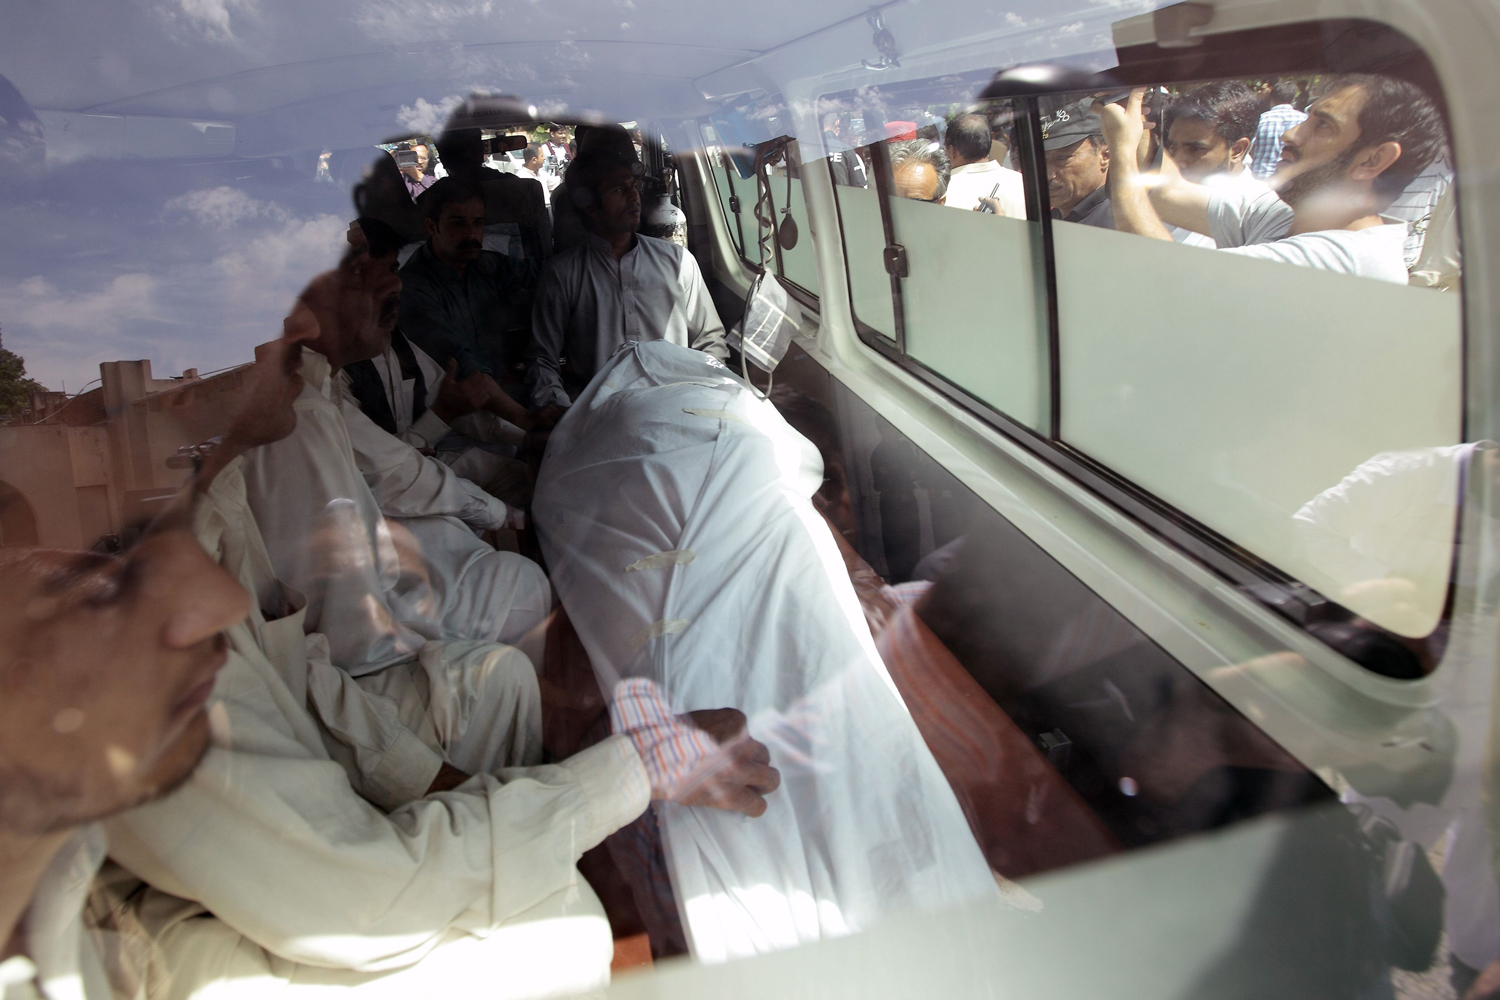 The body of Chaudhry Zulfikar, who was killed by unidentified gunmen, is seen through an ambulance window in Islamabad